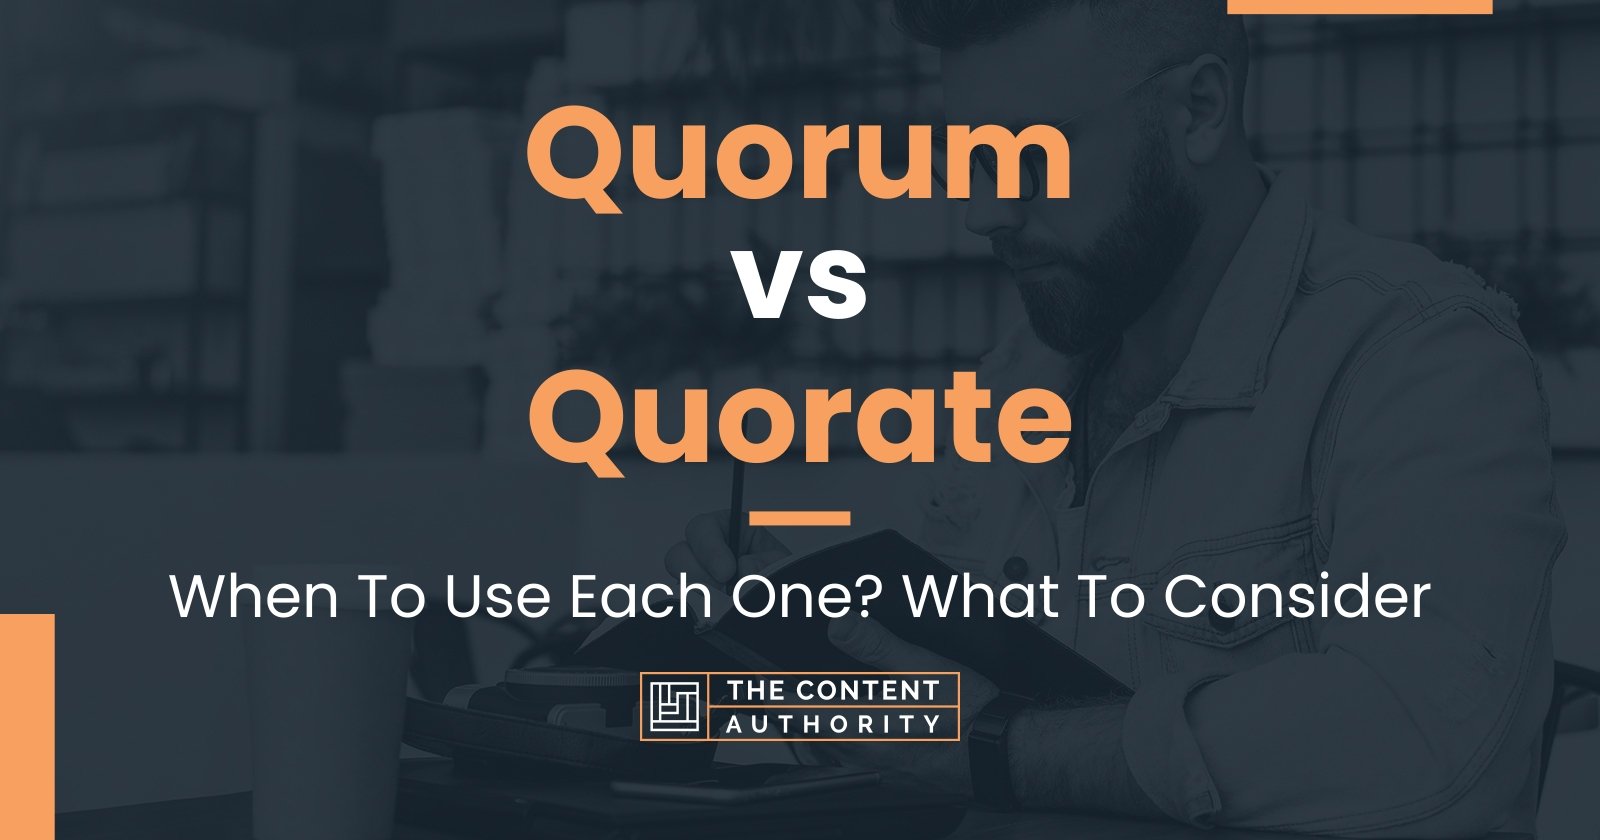 Quorum vs Quorate: When To Use Each One? What To Consider